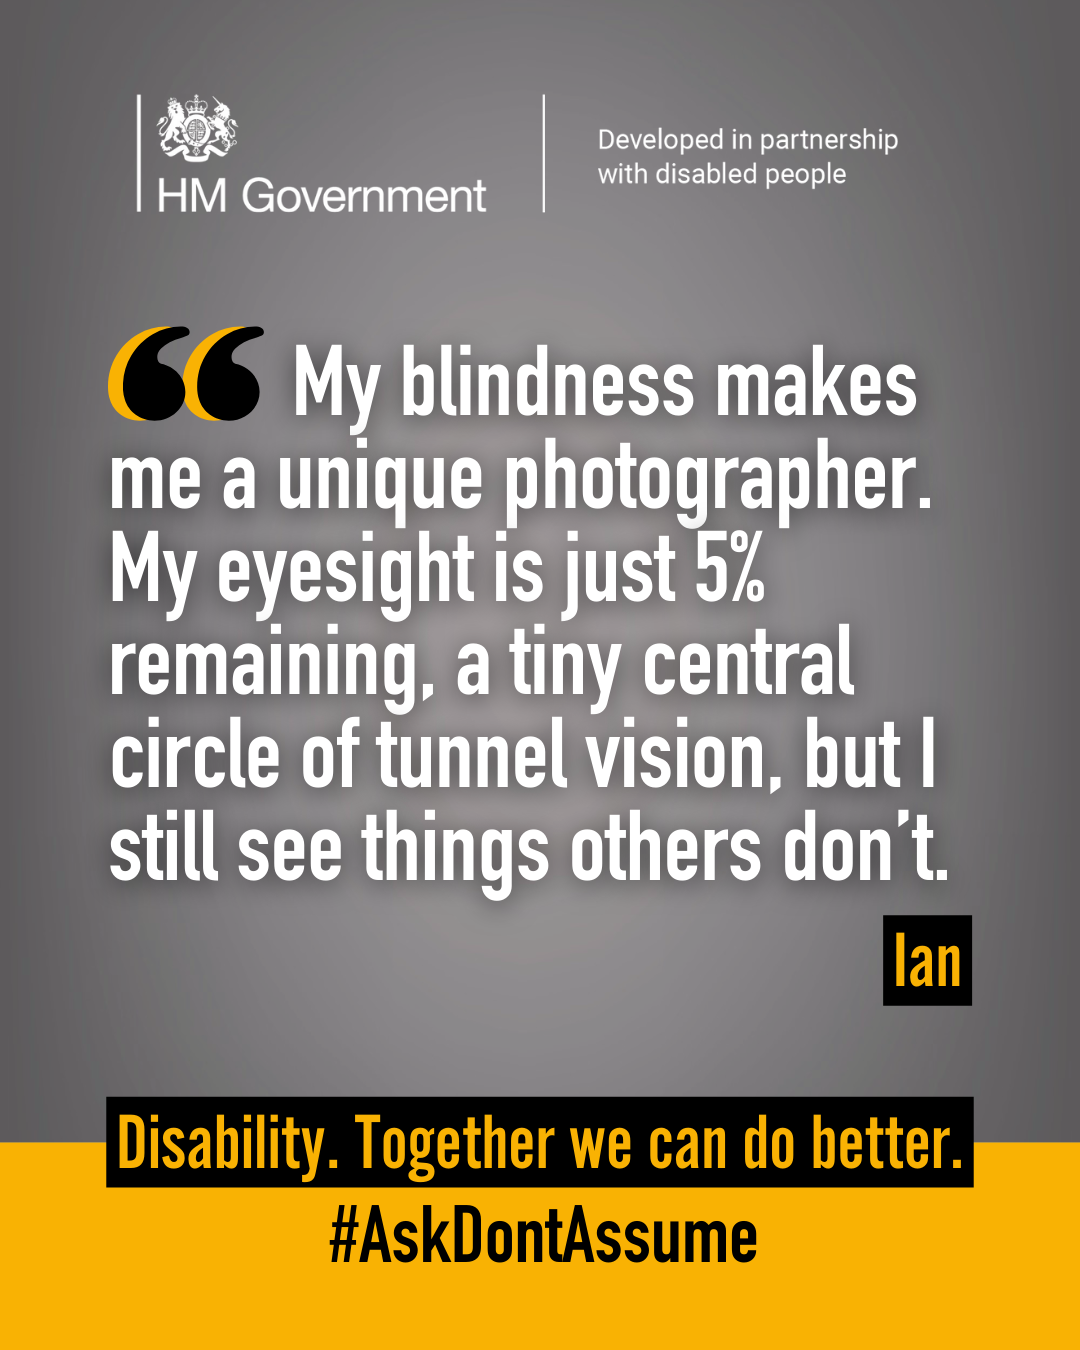 Dark grey portrait graphic with the HM Government logo and “Developed in partnership with disabled people” at the top. A quote from Ian reads: “My blindness makes me a unique photographer. My eyesight is just 5% remaining, a tiny central circle of tunnel vision, but I still see things others don’t”. At the bottom of the graphic it reads: “Disability. Together we can do better. #AskDontAssume”